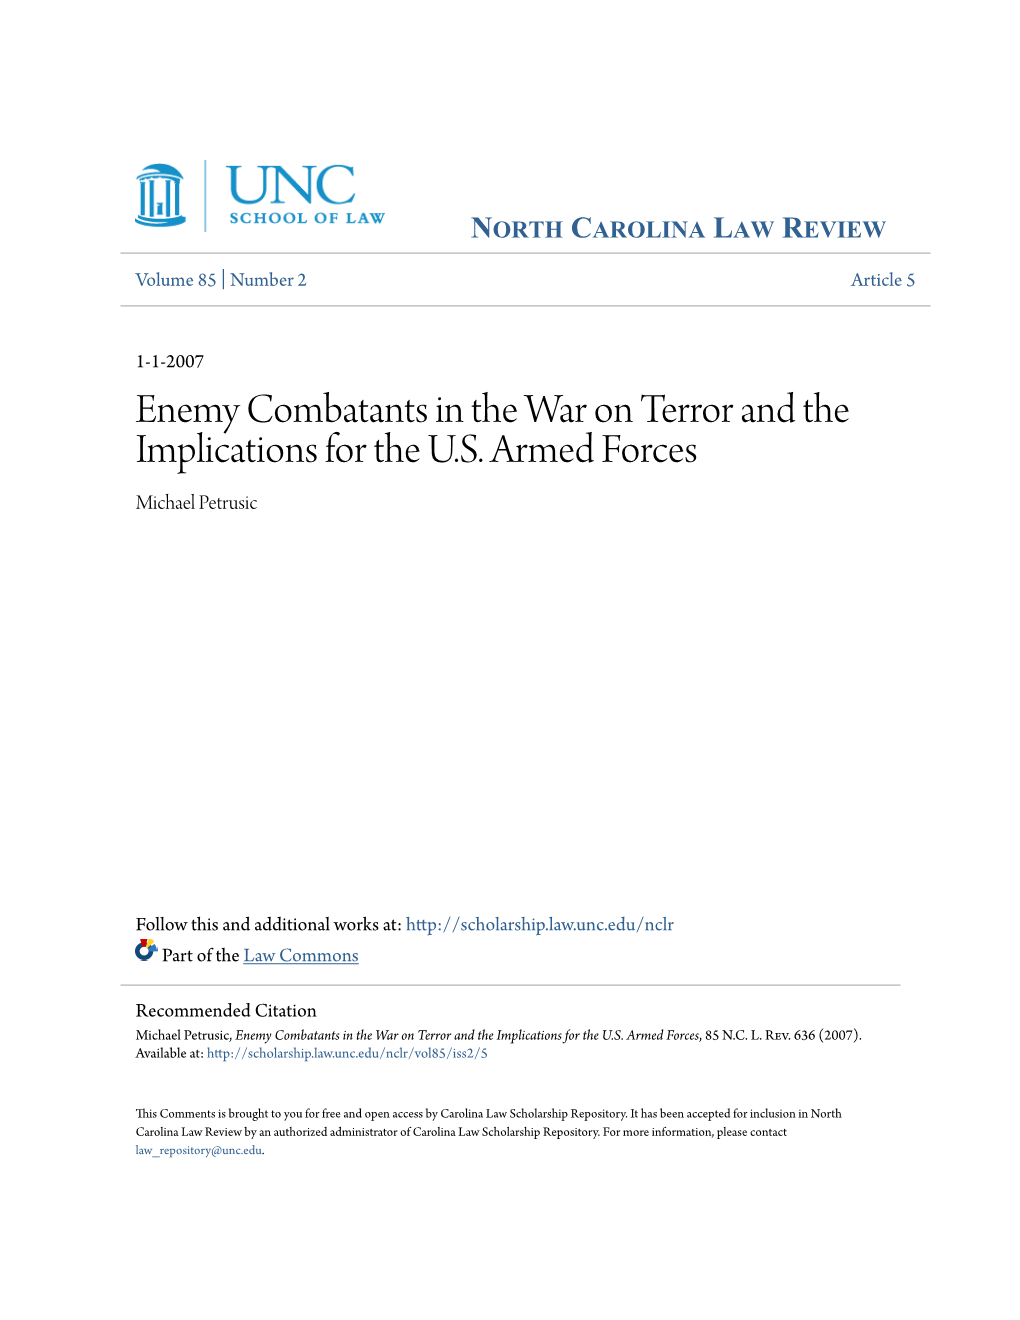 Enemy Combatants in the War on Terror and the Implications for the U.S